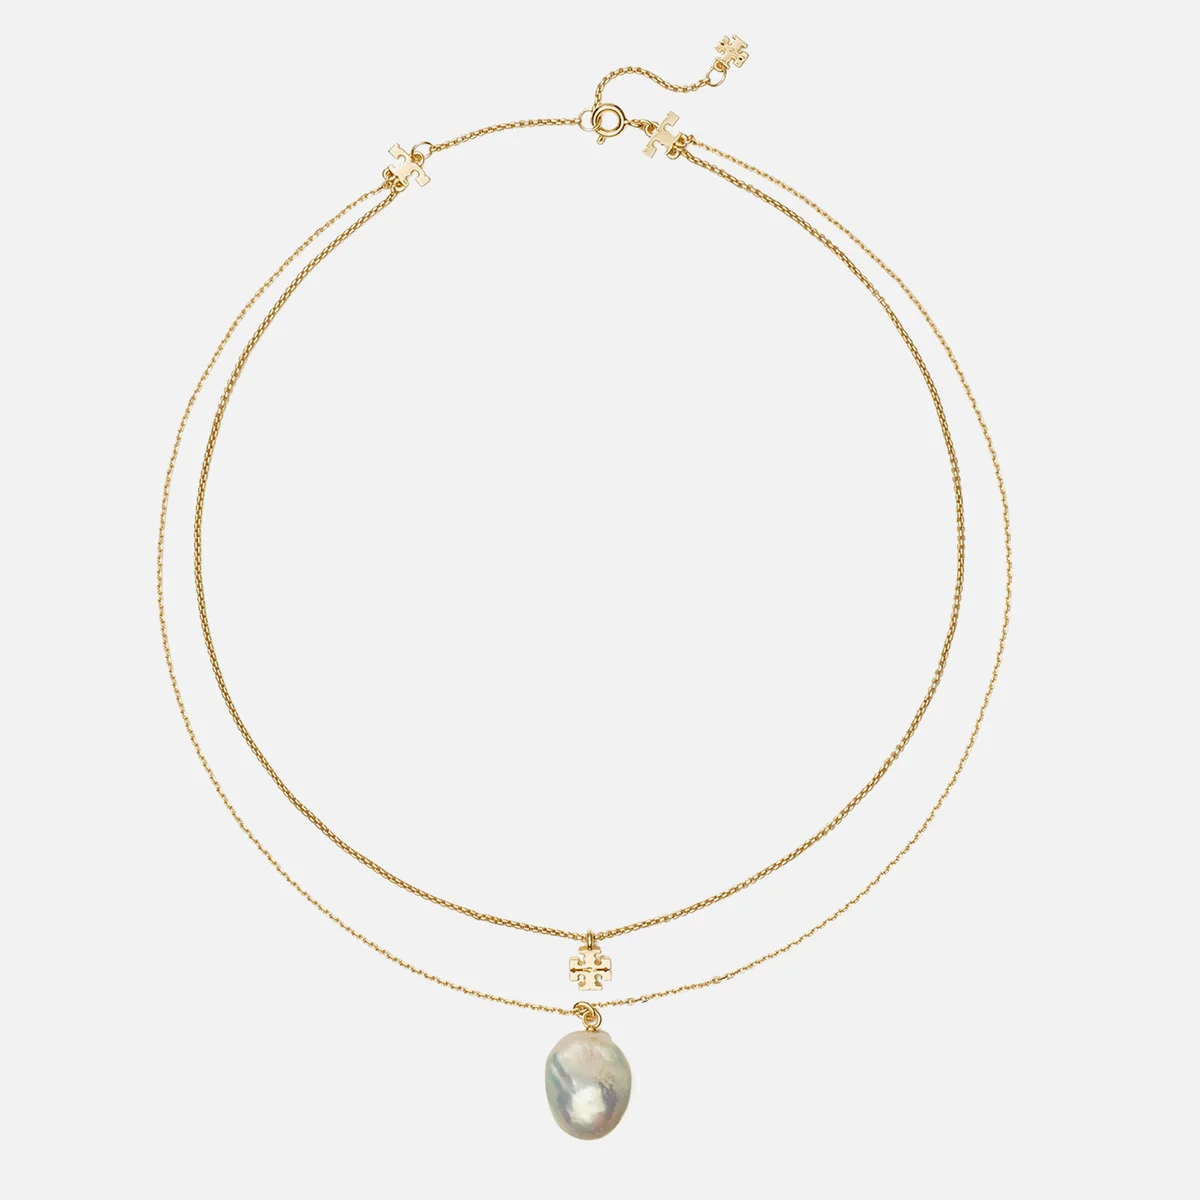 Tory Burch Kira Gold-Plated Freshwater Pearl Necklace Image 1